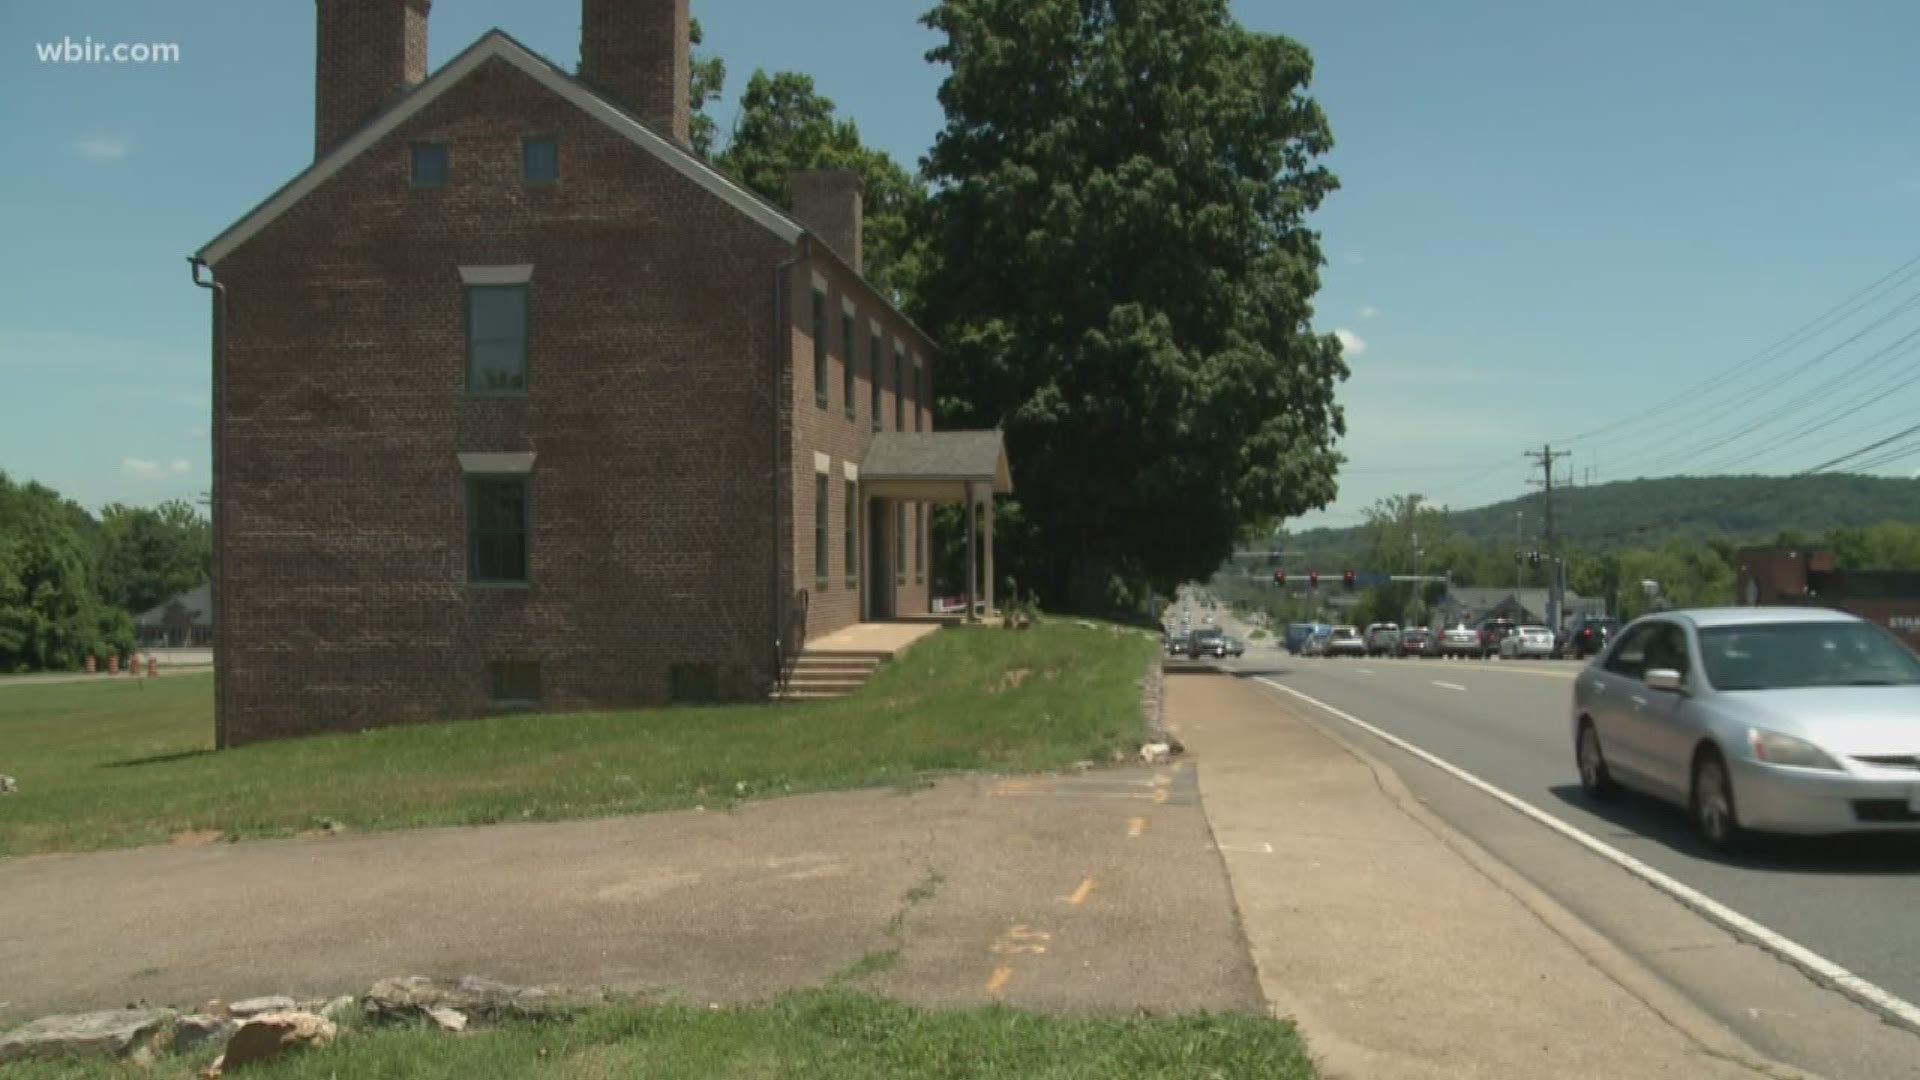 The town has worked for years to restore the Campbell Station Inn at the corner of Campbell Station and Kingston Pike.